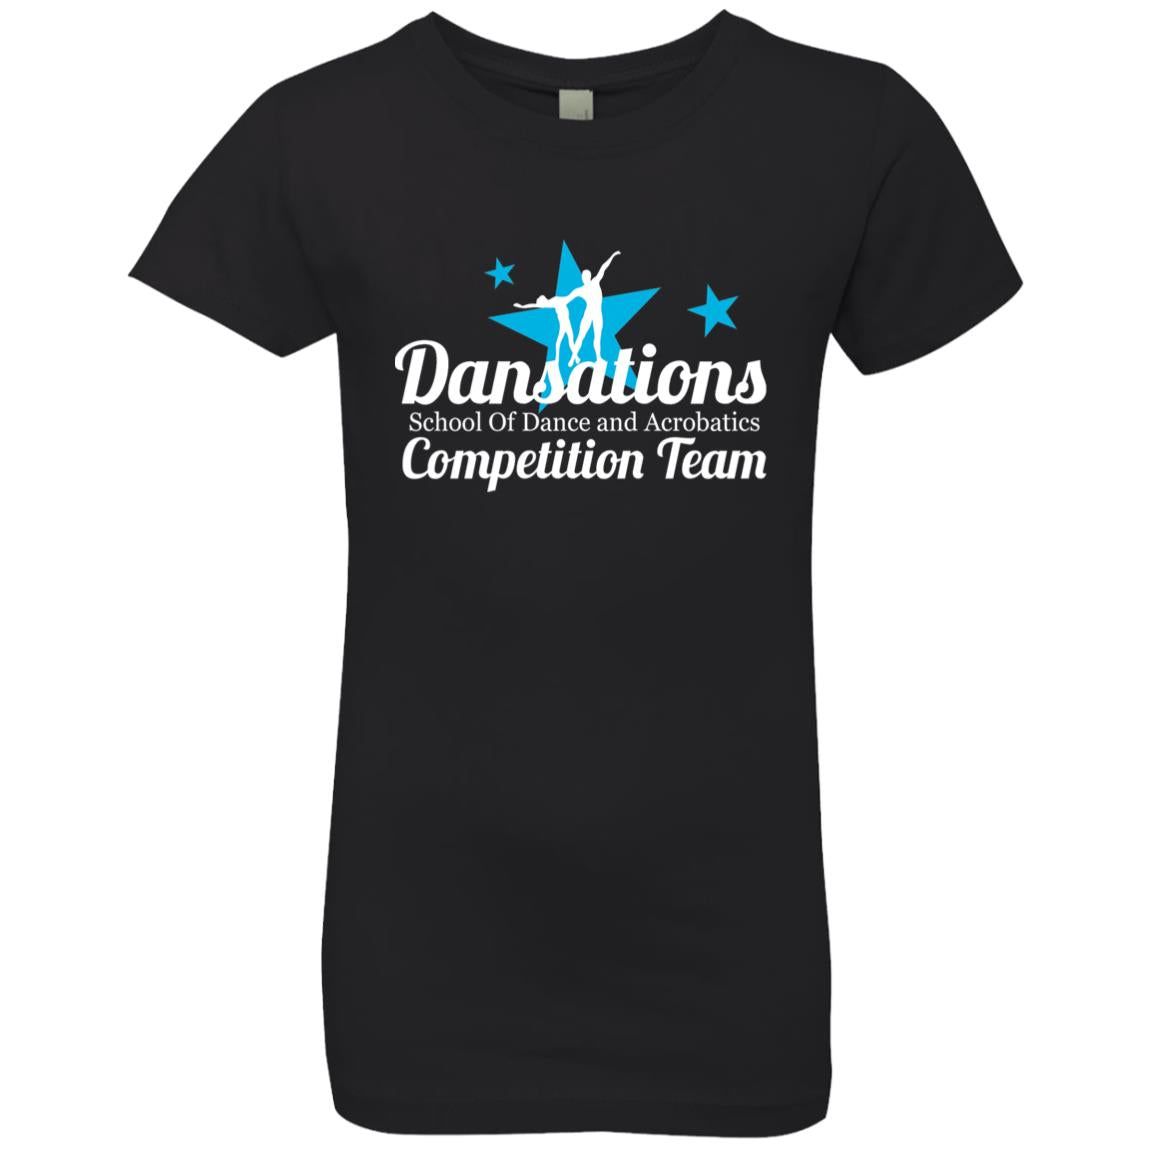 Dansations Youth Competition Team Girls' Princess T-Shirt